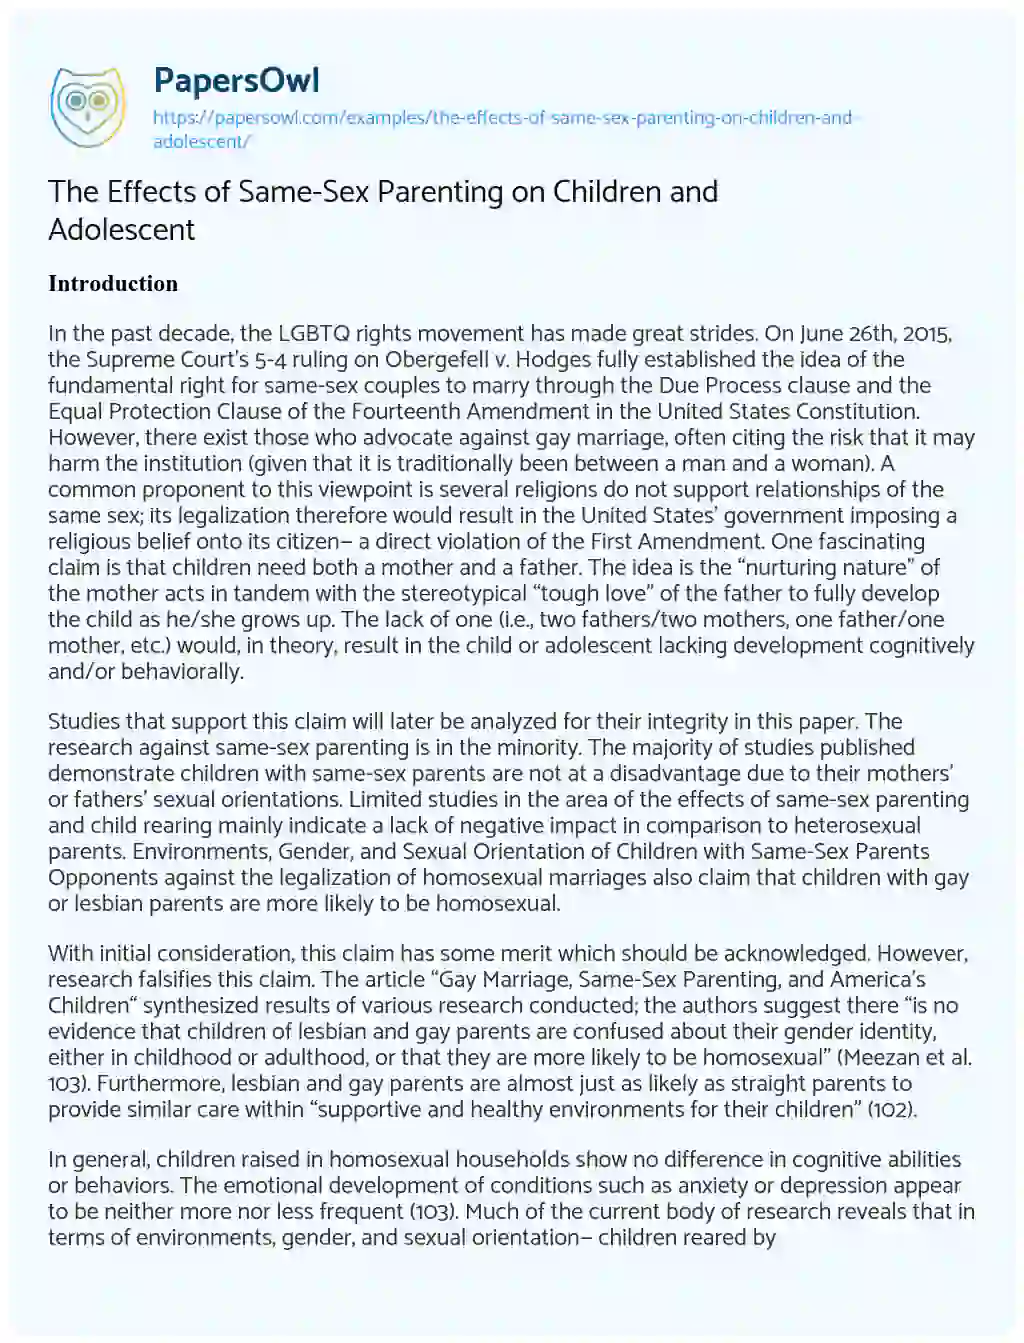 Essay on The Effects of Same-Sex Parenting on Children and Adolescent